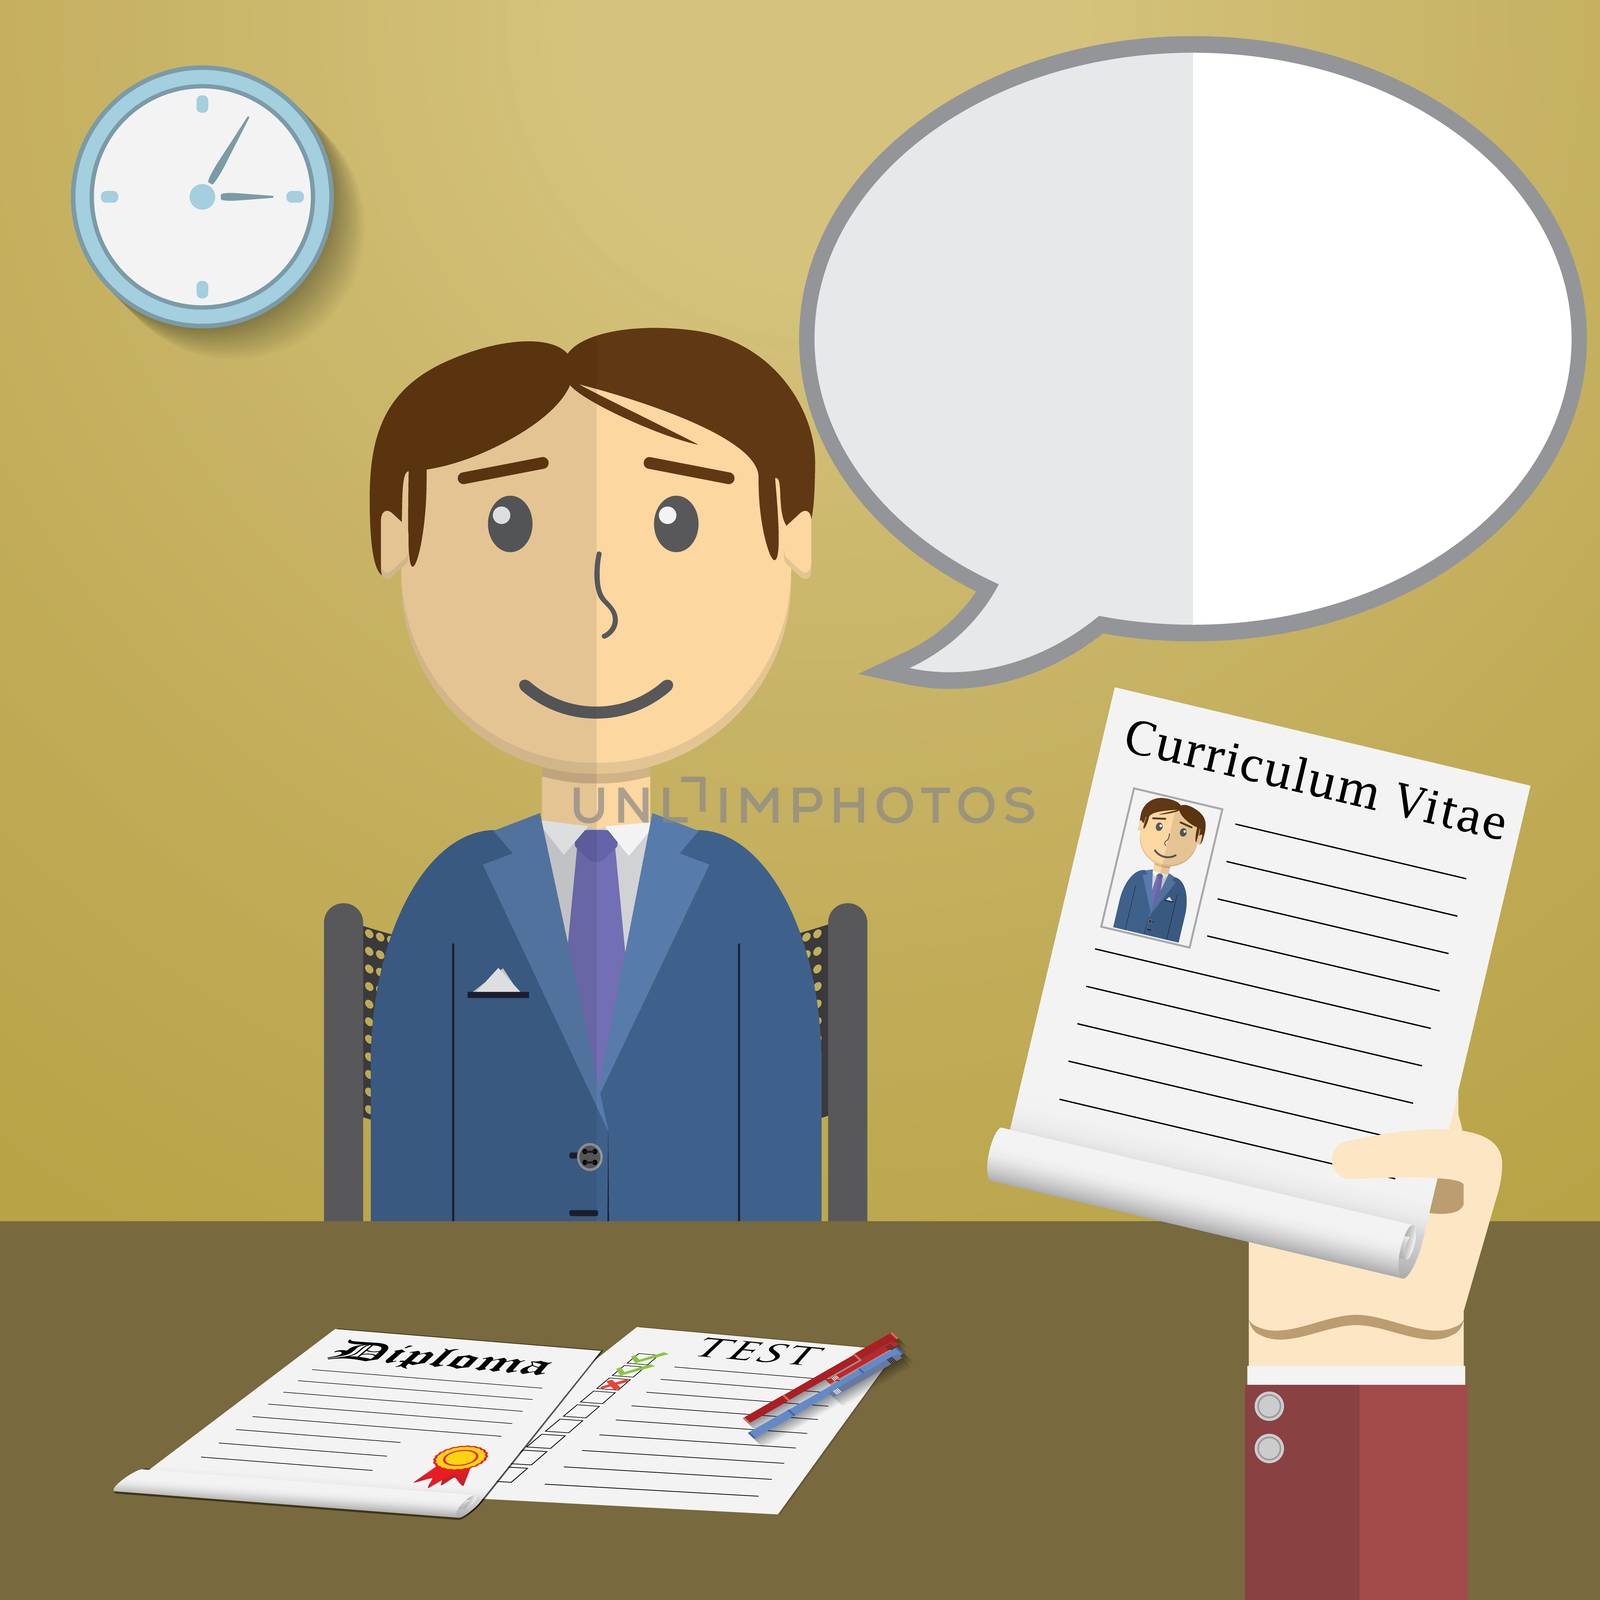 Flat design vector illustration concept for job interview, Hand Holding CV Profile talking to Candidate on Position.